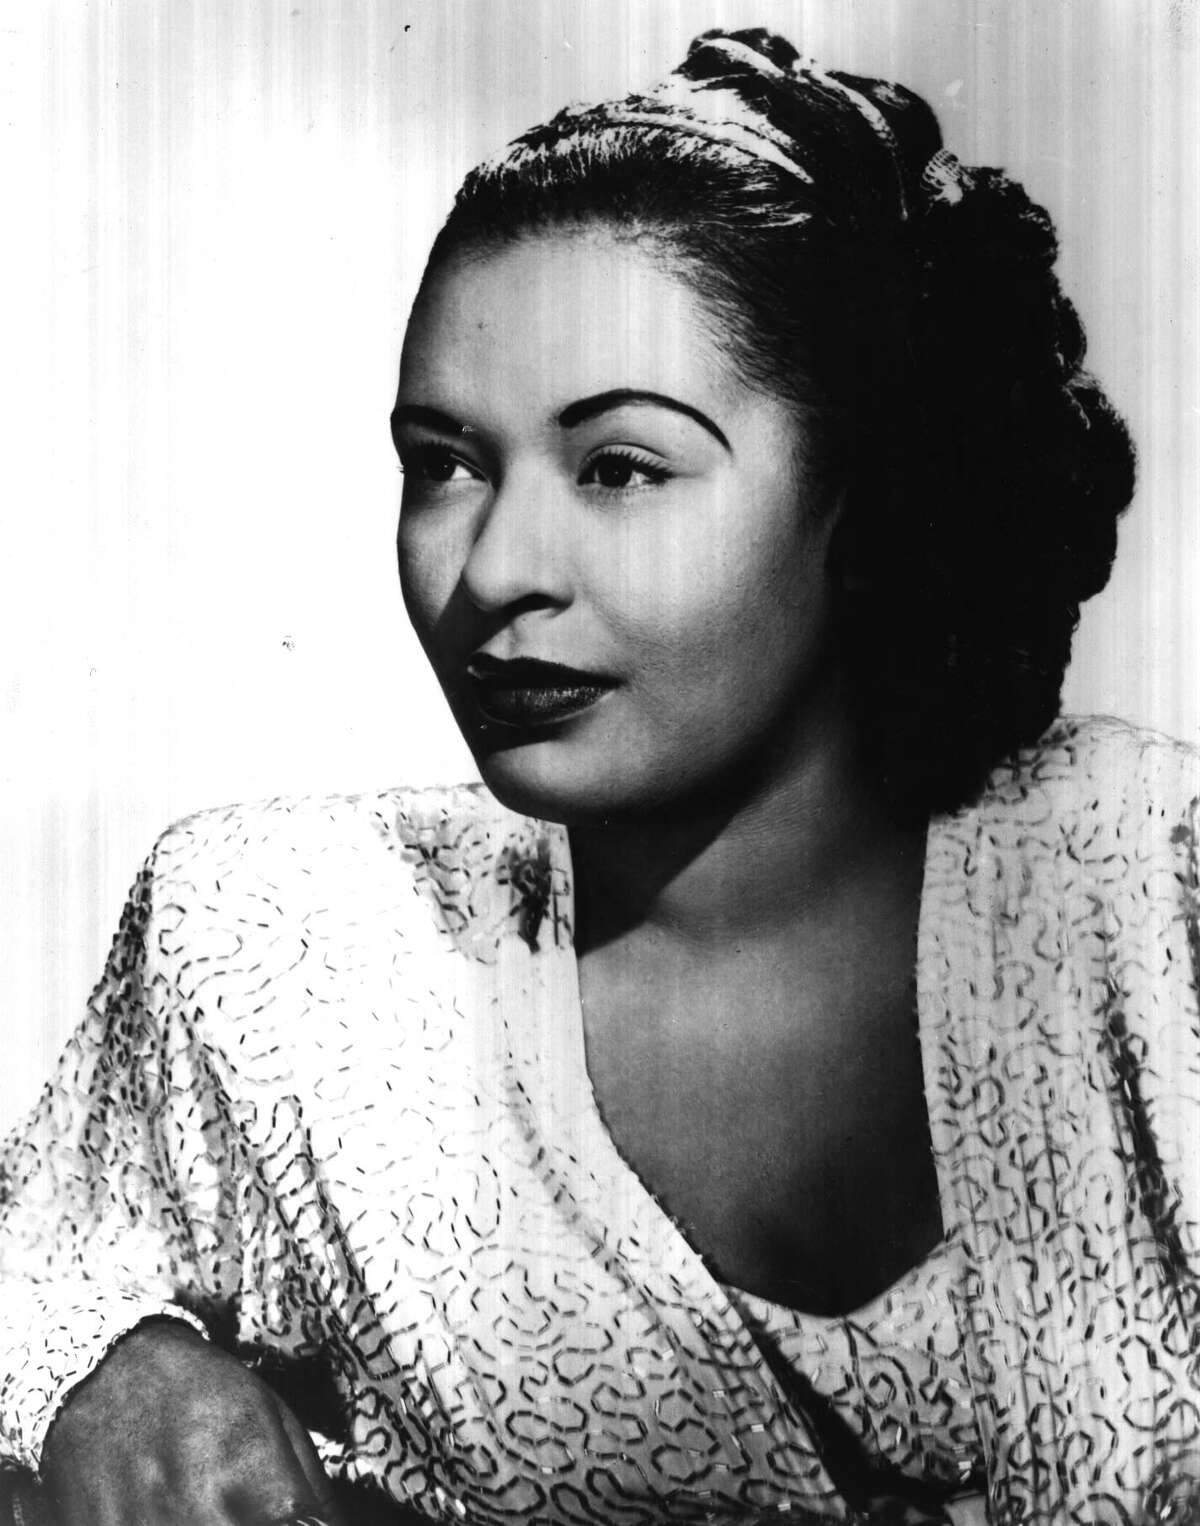 Becoming Billie Holiday a challenge for actress